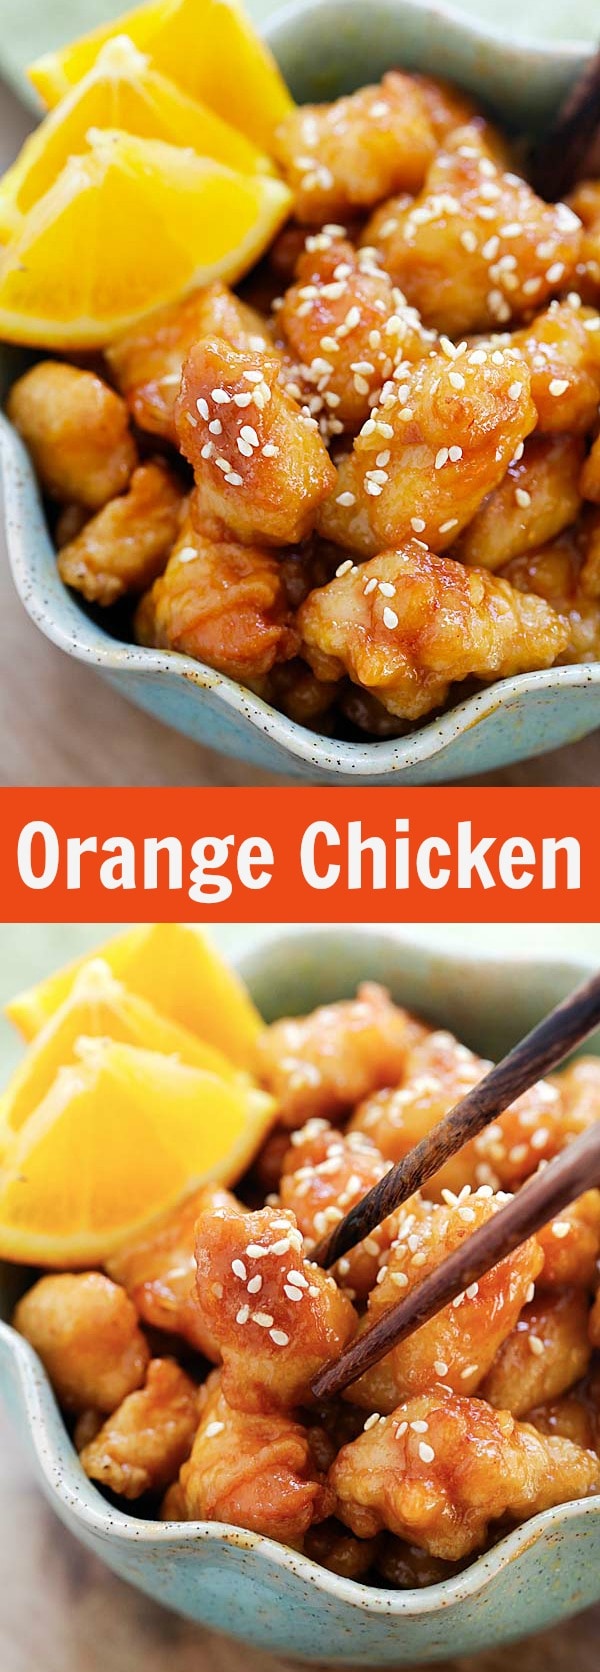 Easy Orange Chicken - crispy chicken in tangy orange sauce with vinegar, soy sauce, sugar and chicken broth. Takes 30 minutes to make and much better than Panda Express or takeout | rasamalaysia.com